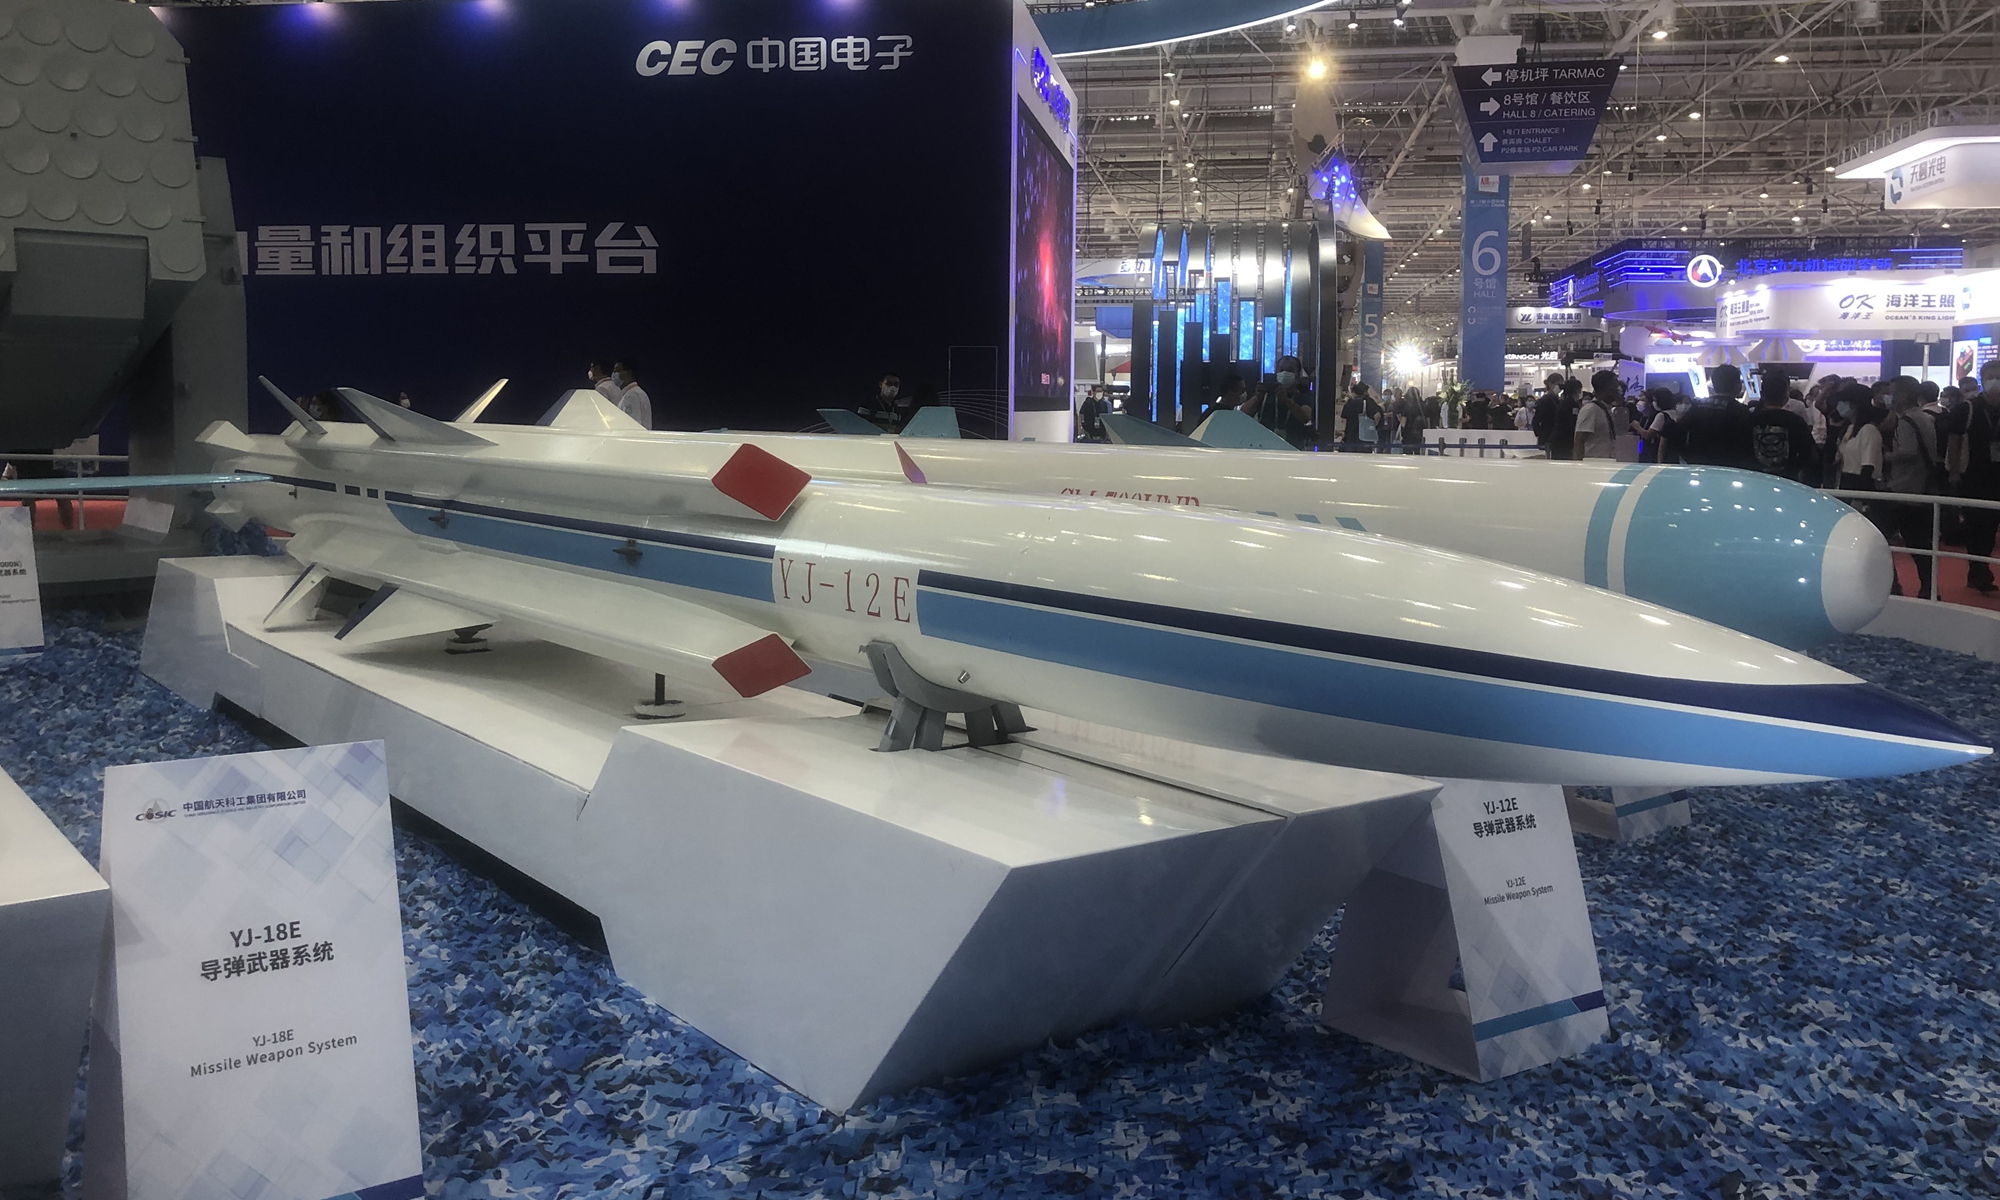 YJ-12E missile is displayed at Airshow China 2021 in Zhuhai, South China's Guangdong Province. Photo: Leng Shumei/GT